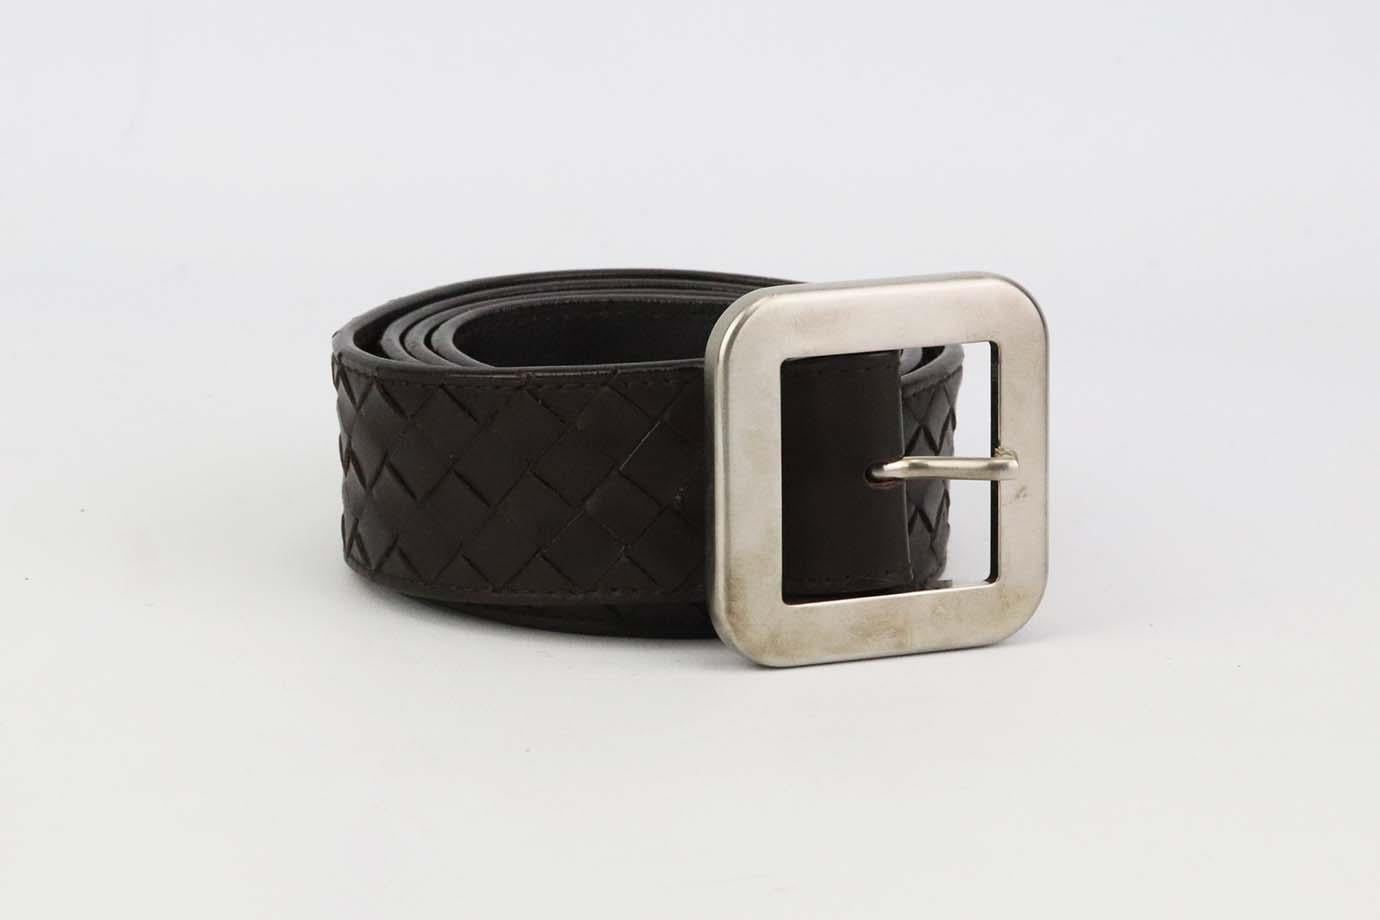 This belt by Bottega Veneta has been made with the brand’s iconic intrecciato technique, made from interlacing lengths of leather and topstitched at the edges, this belt is the perfect size for cinching a blazer or slipping through wider belt loops.